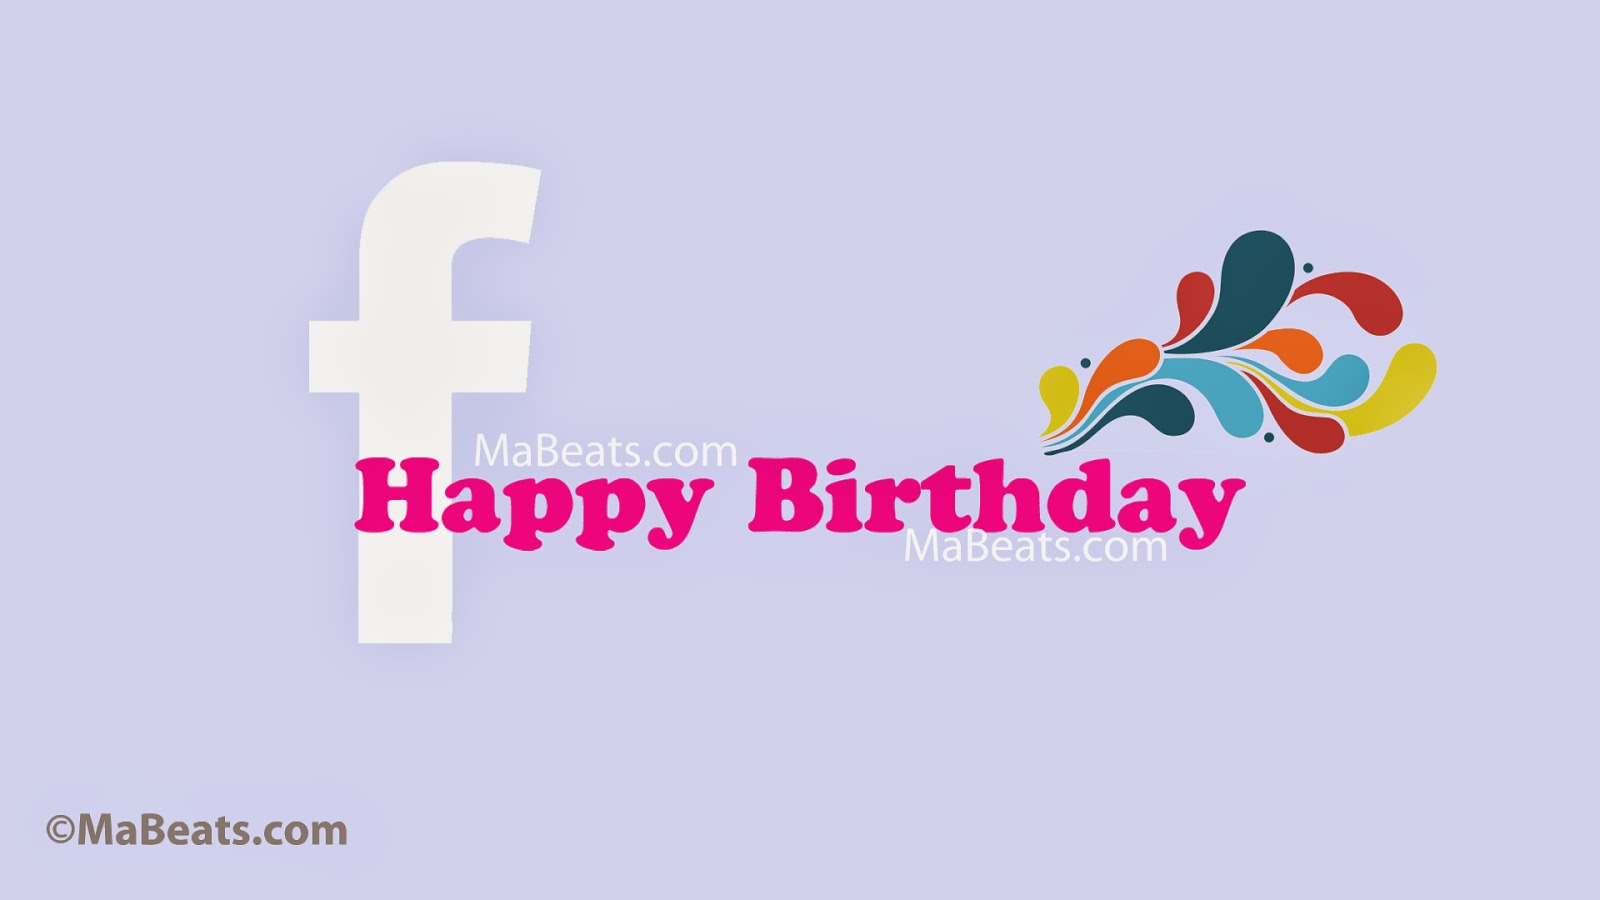 Facebook and birthdays - Being a Non wisher 